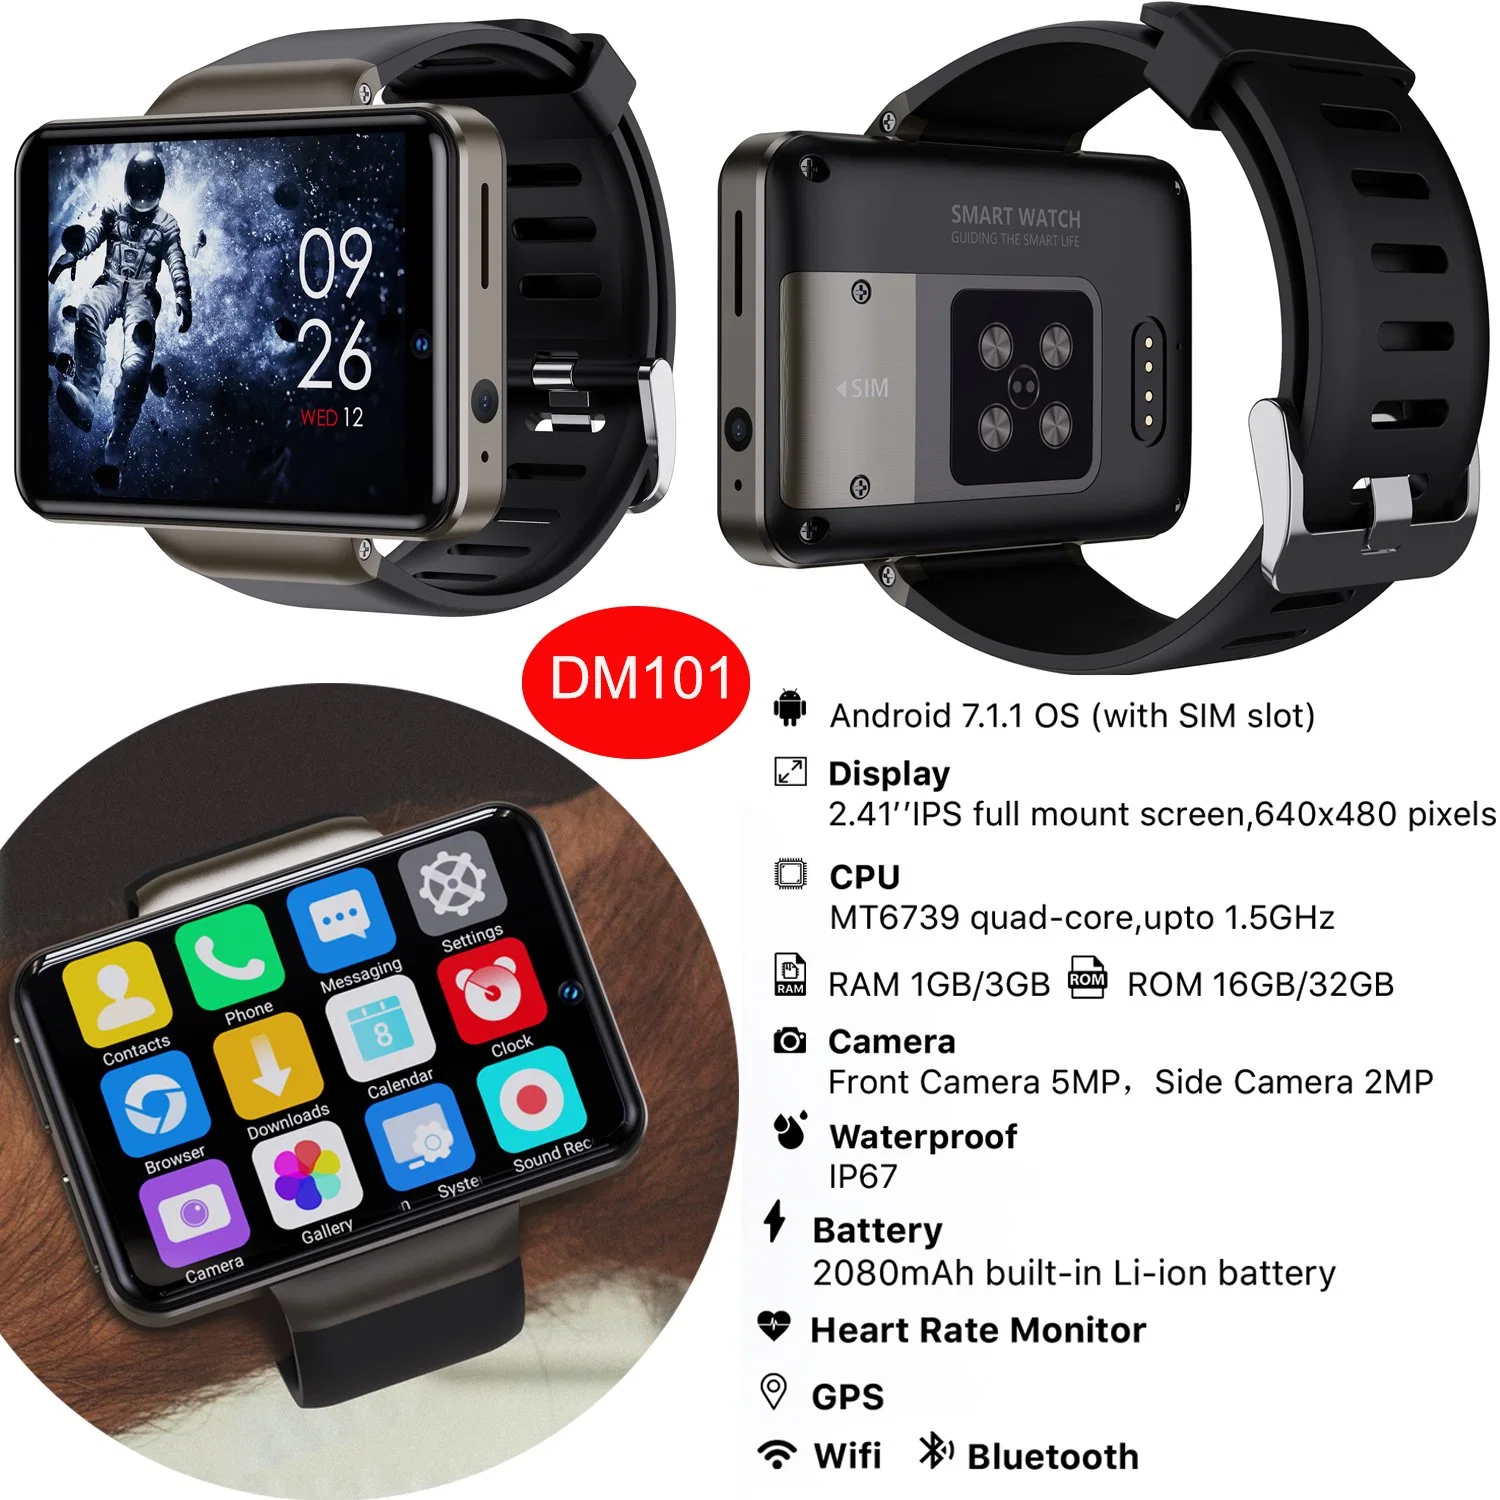 4G LTE Full Touch Large Battery Capacity Dual Camera Smart Watch Phone with Health Monitor DM101